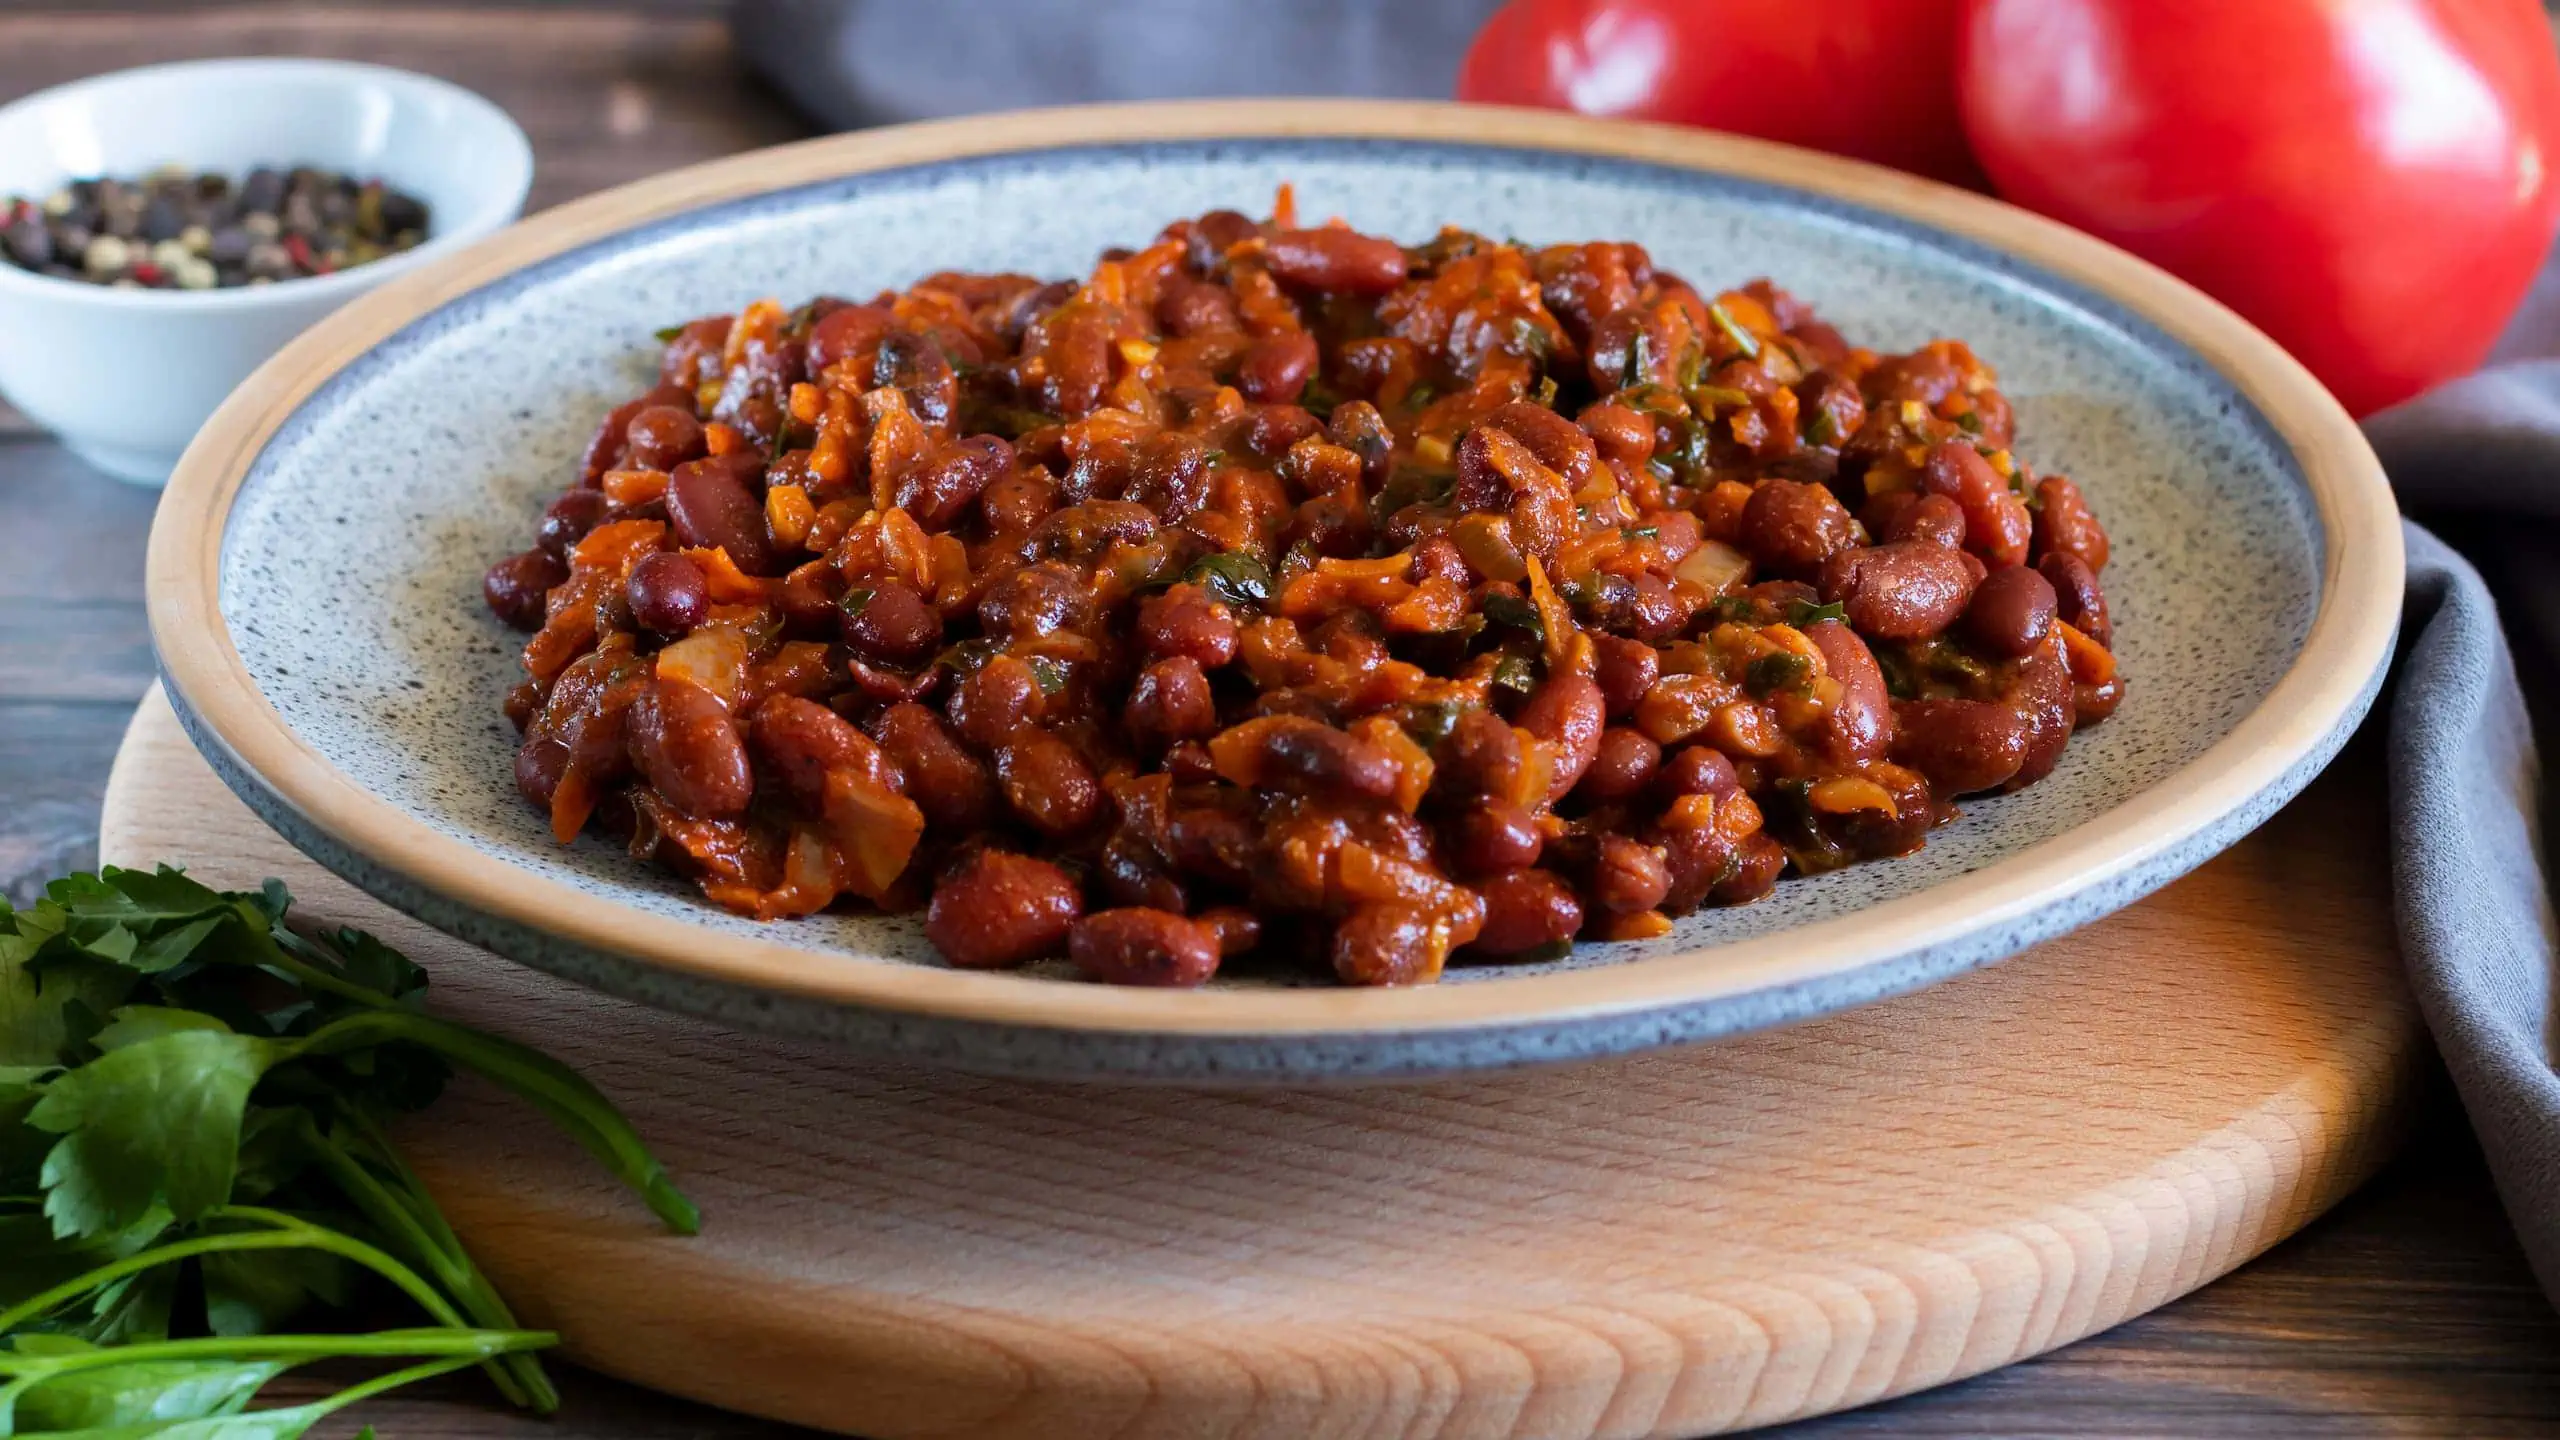 Our version of bush beans chili